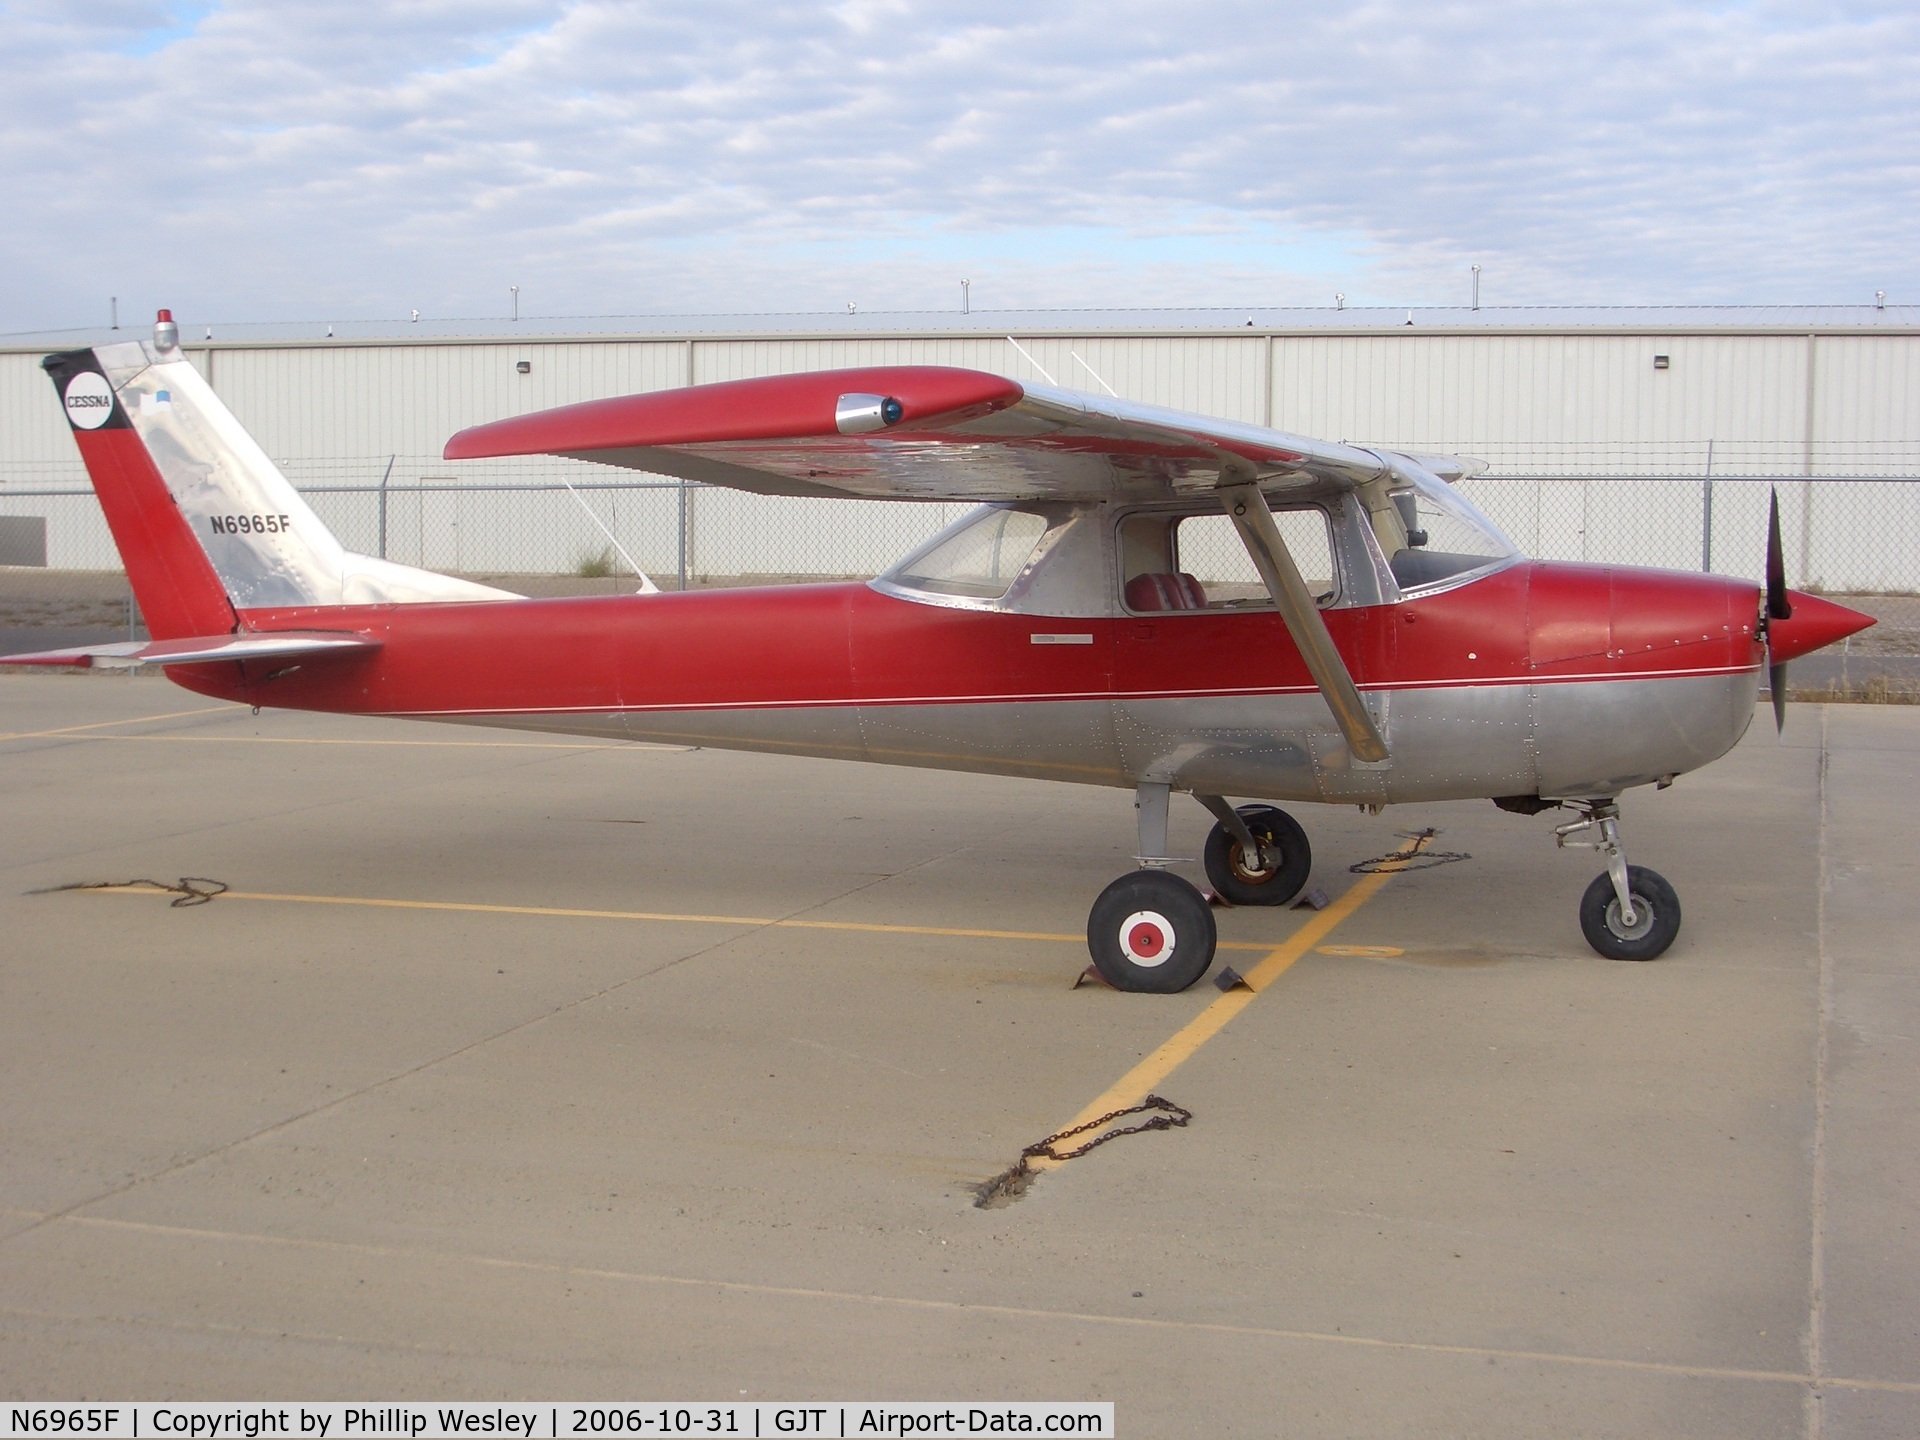 N6965F, 1966 Cessna 150F C/N 15063565, 1966 C150F in Grand Junction, CO owned by Phillip Wesley